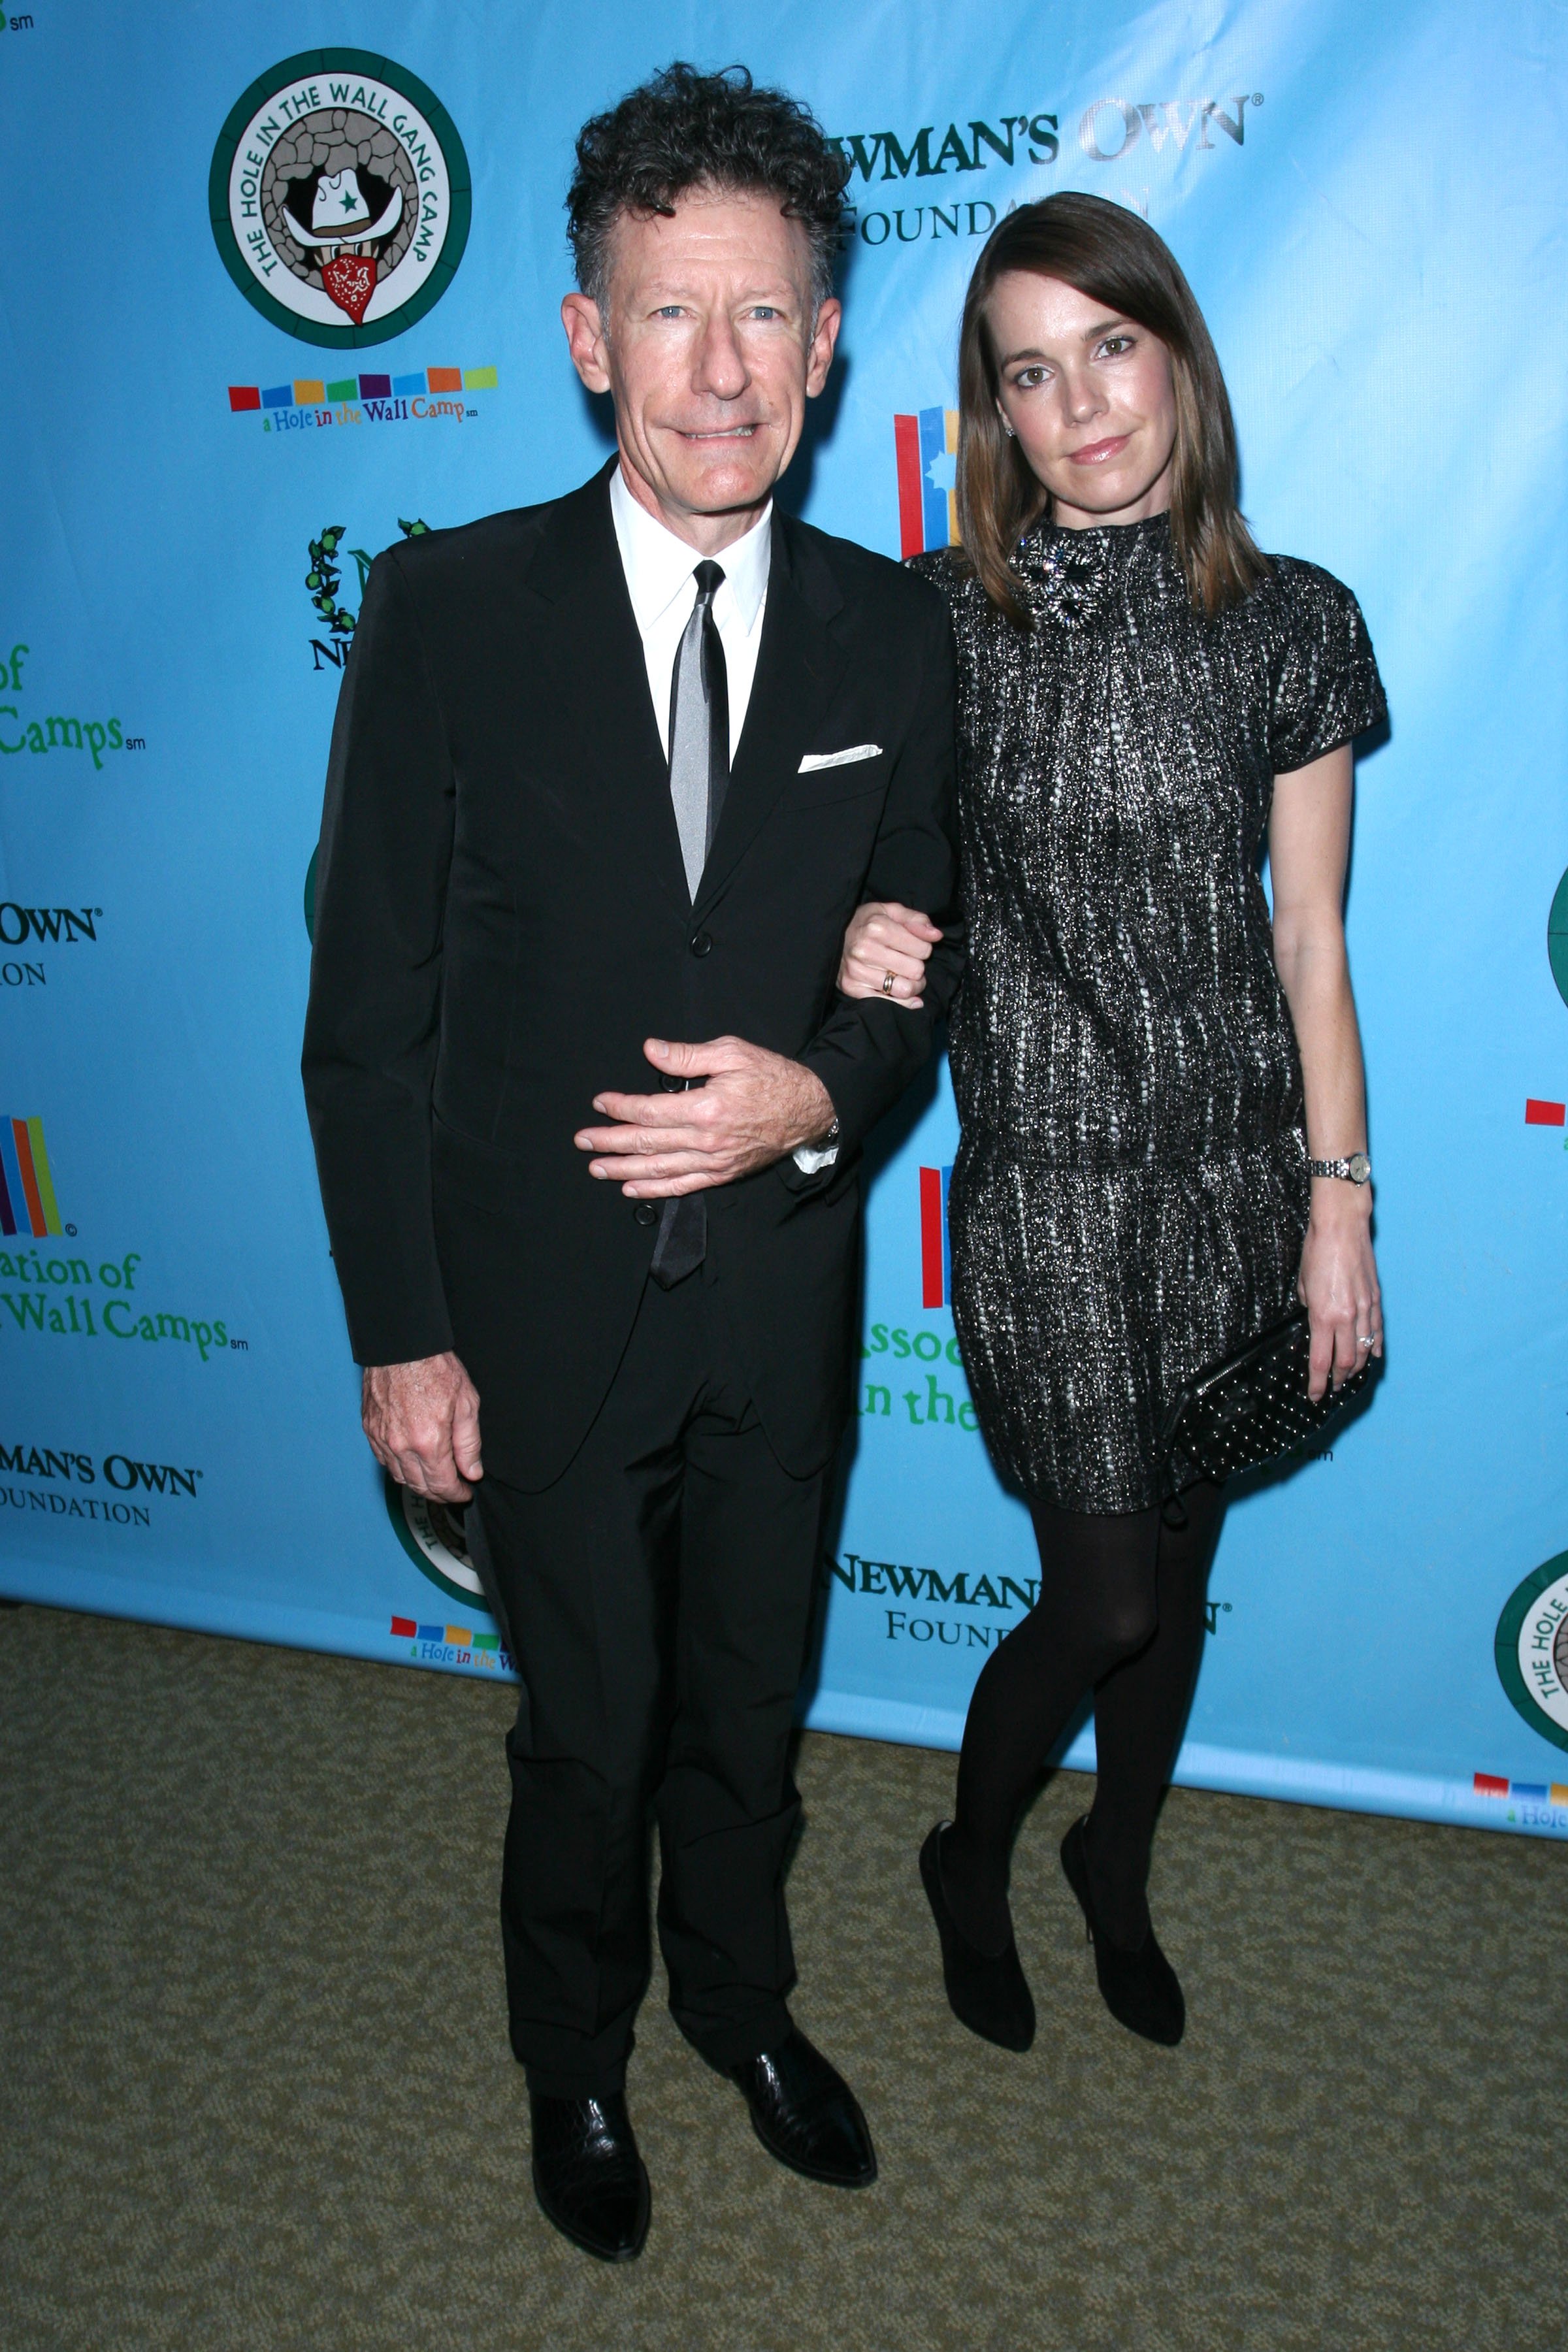 Lyle Lovett and April Kimble during a celebration of Paul Newman's "Hole In The Wall" Camps at Lincoln Center on October 21st, 2010 in New York City. / Source: Getty Images